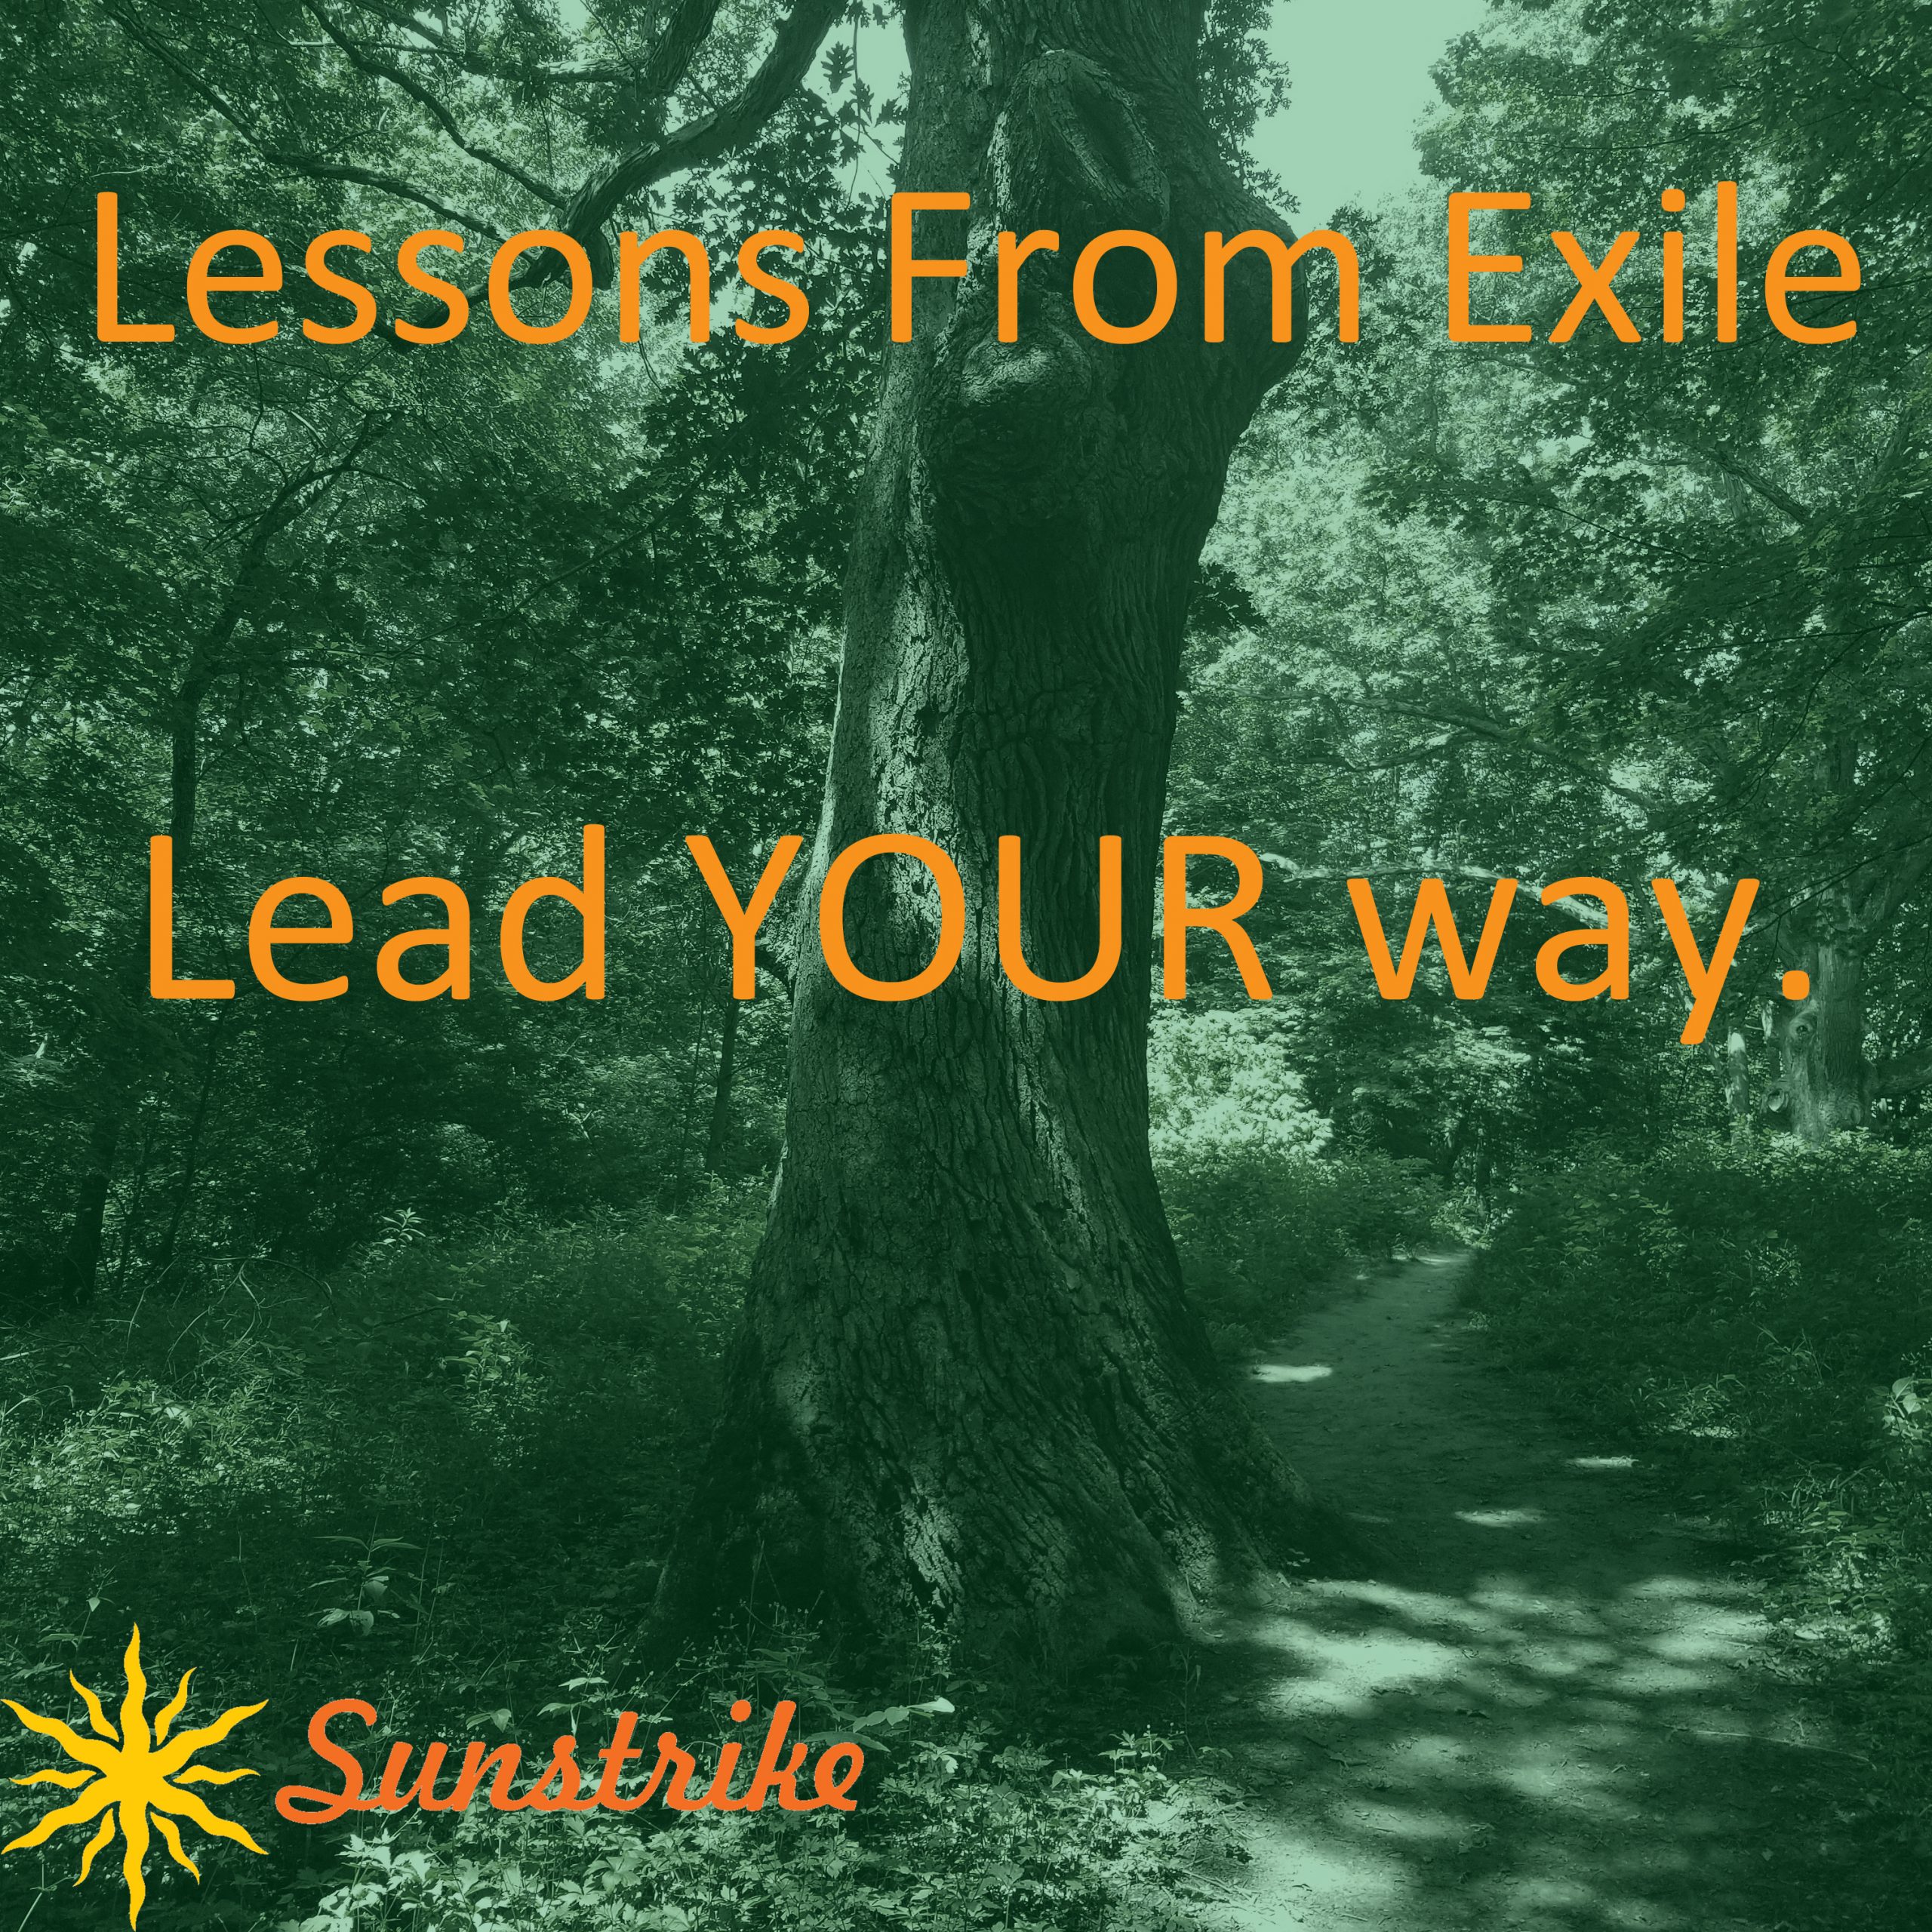 Lessons from Exile #20: Lead Your Way. But LEAD.